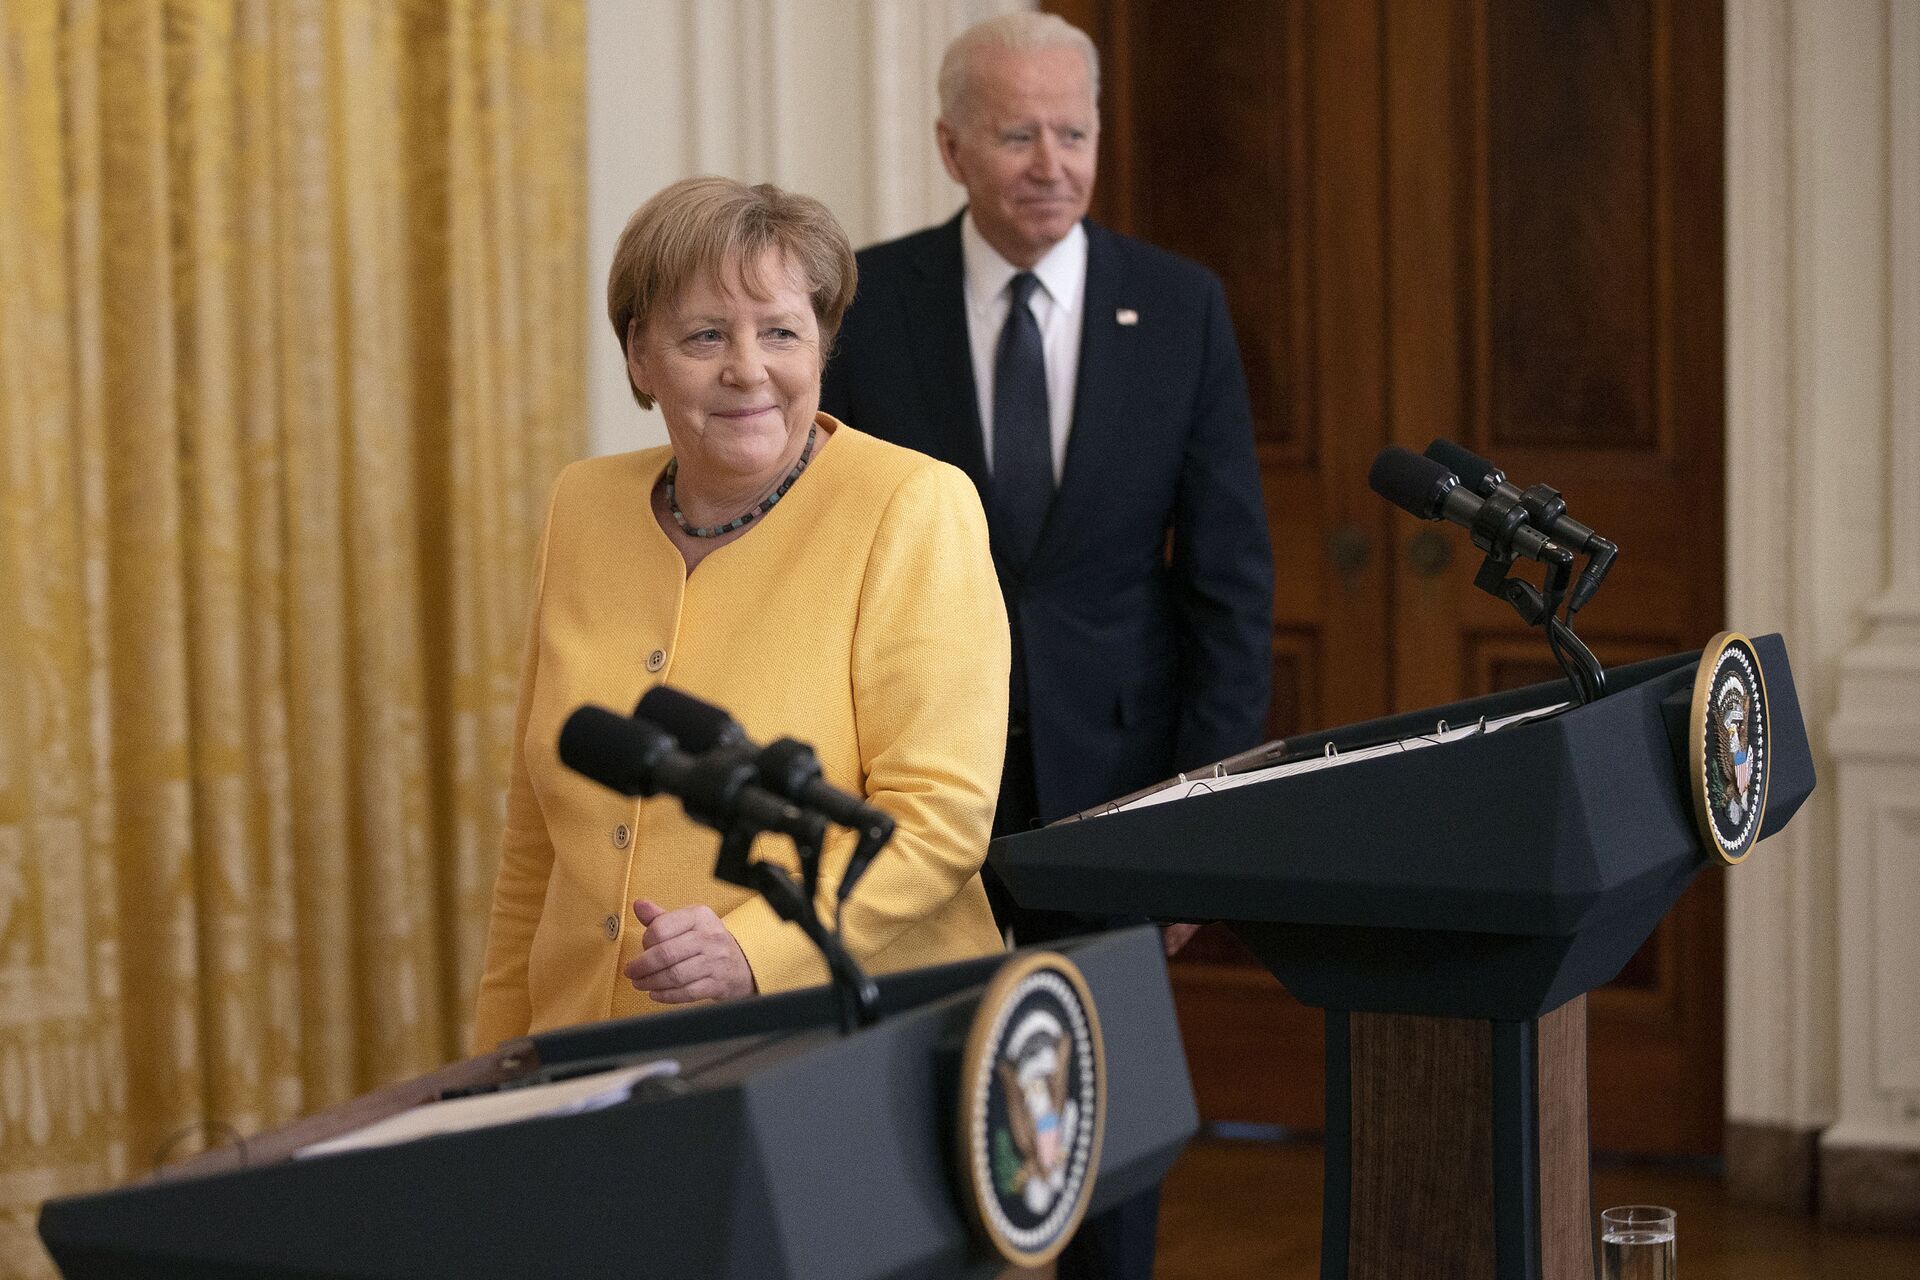 German Chancellor Angela Merkel (L) and U.S. President Joe Biden take the stage for a joint news conference in the East Room of the White House on July 15, 2021 in Washington, DC. During what is likely her last official visit to Washington, Merkel and Biden discussed their shared priorities on climate change and defense; and Biden voiced his concerns about the Nord Stream 2 Russian natural gas pipeline. - Sputnik International, 1920, 07.09.2021